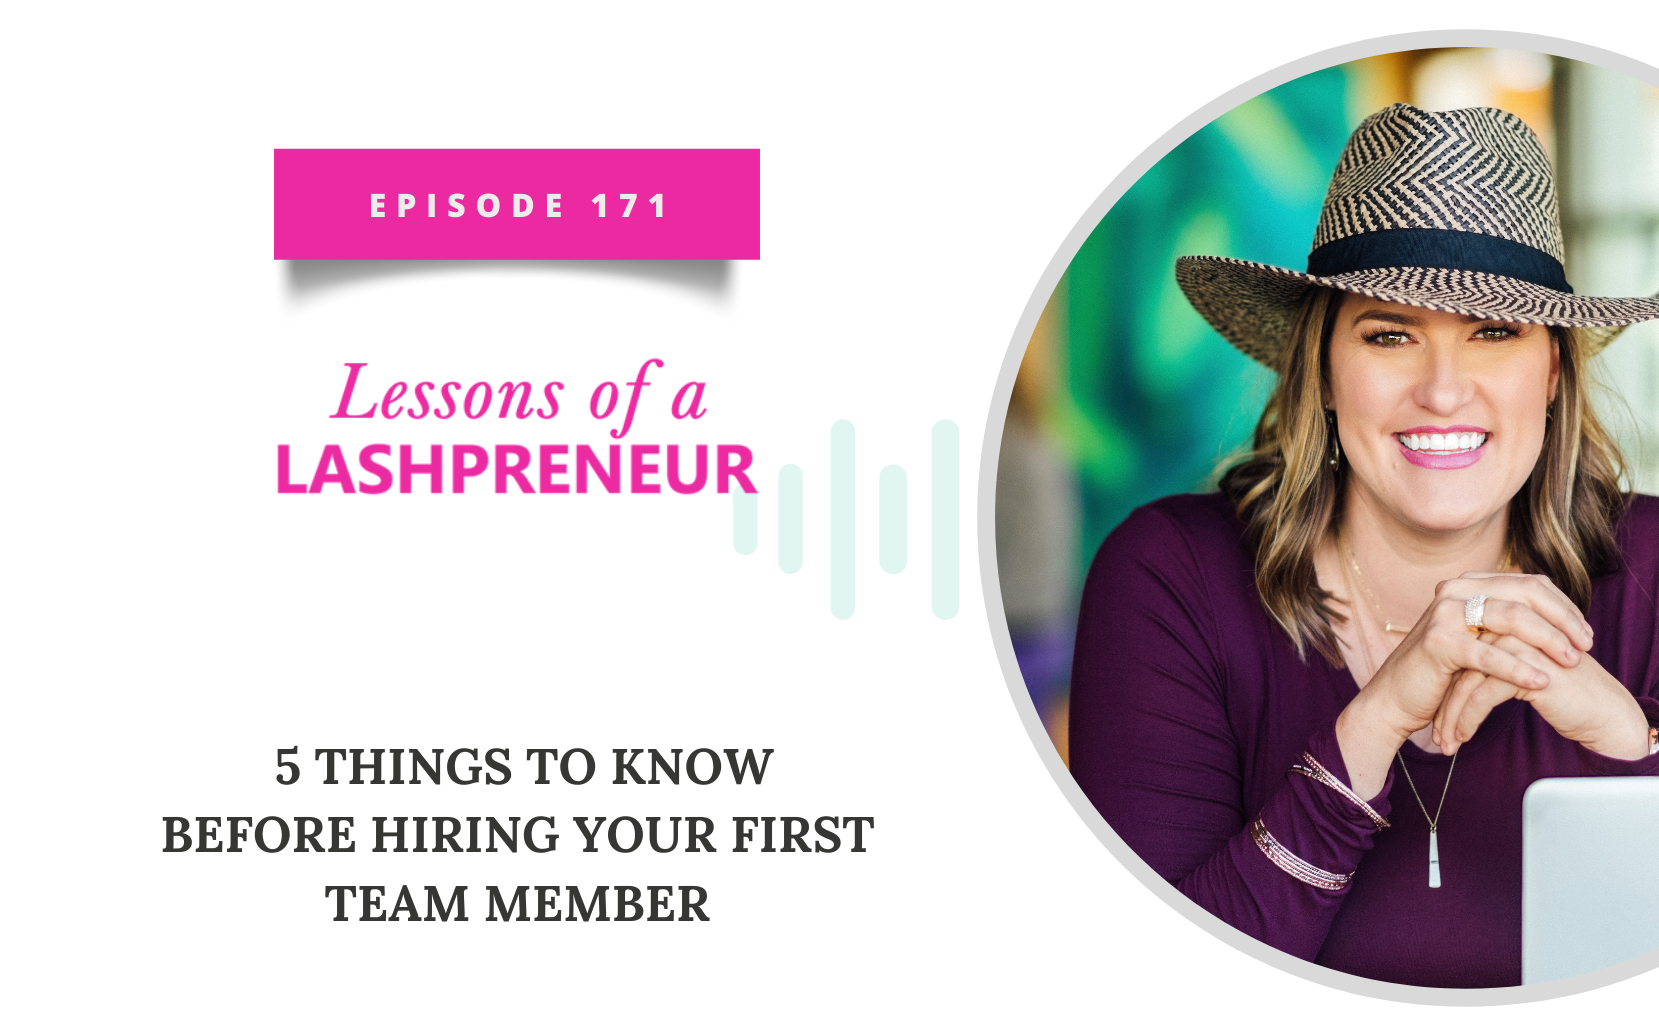 5 Things to Know Before Hiring Your First Team Member